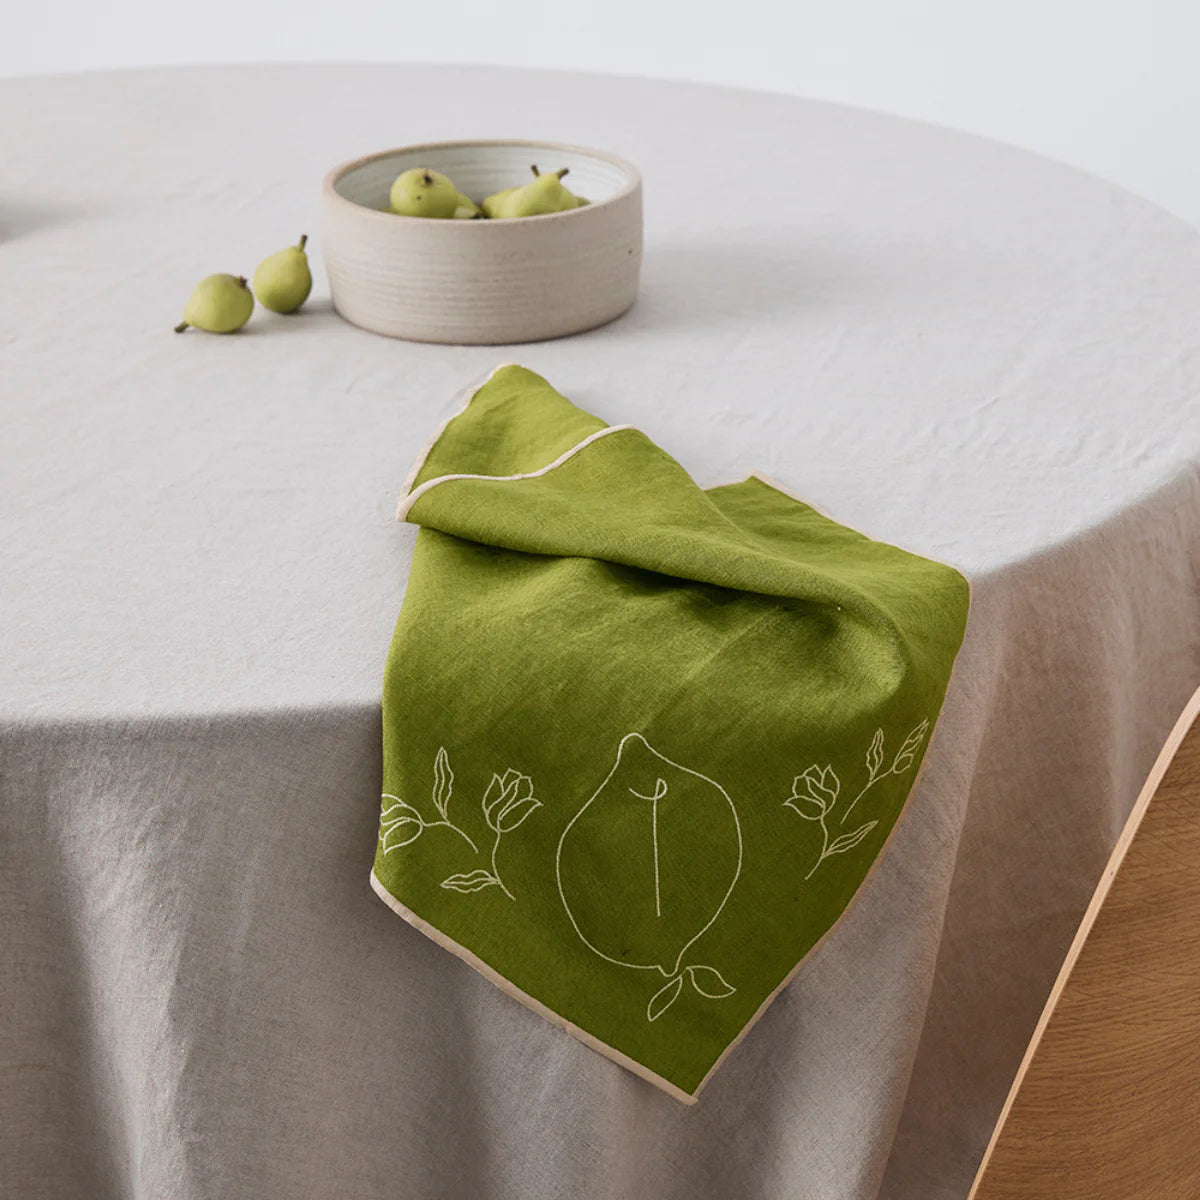 Embroidered Linen Napkin Set in Pickle